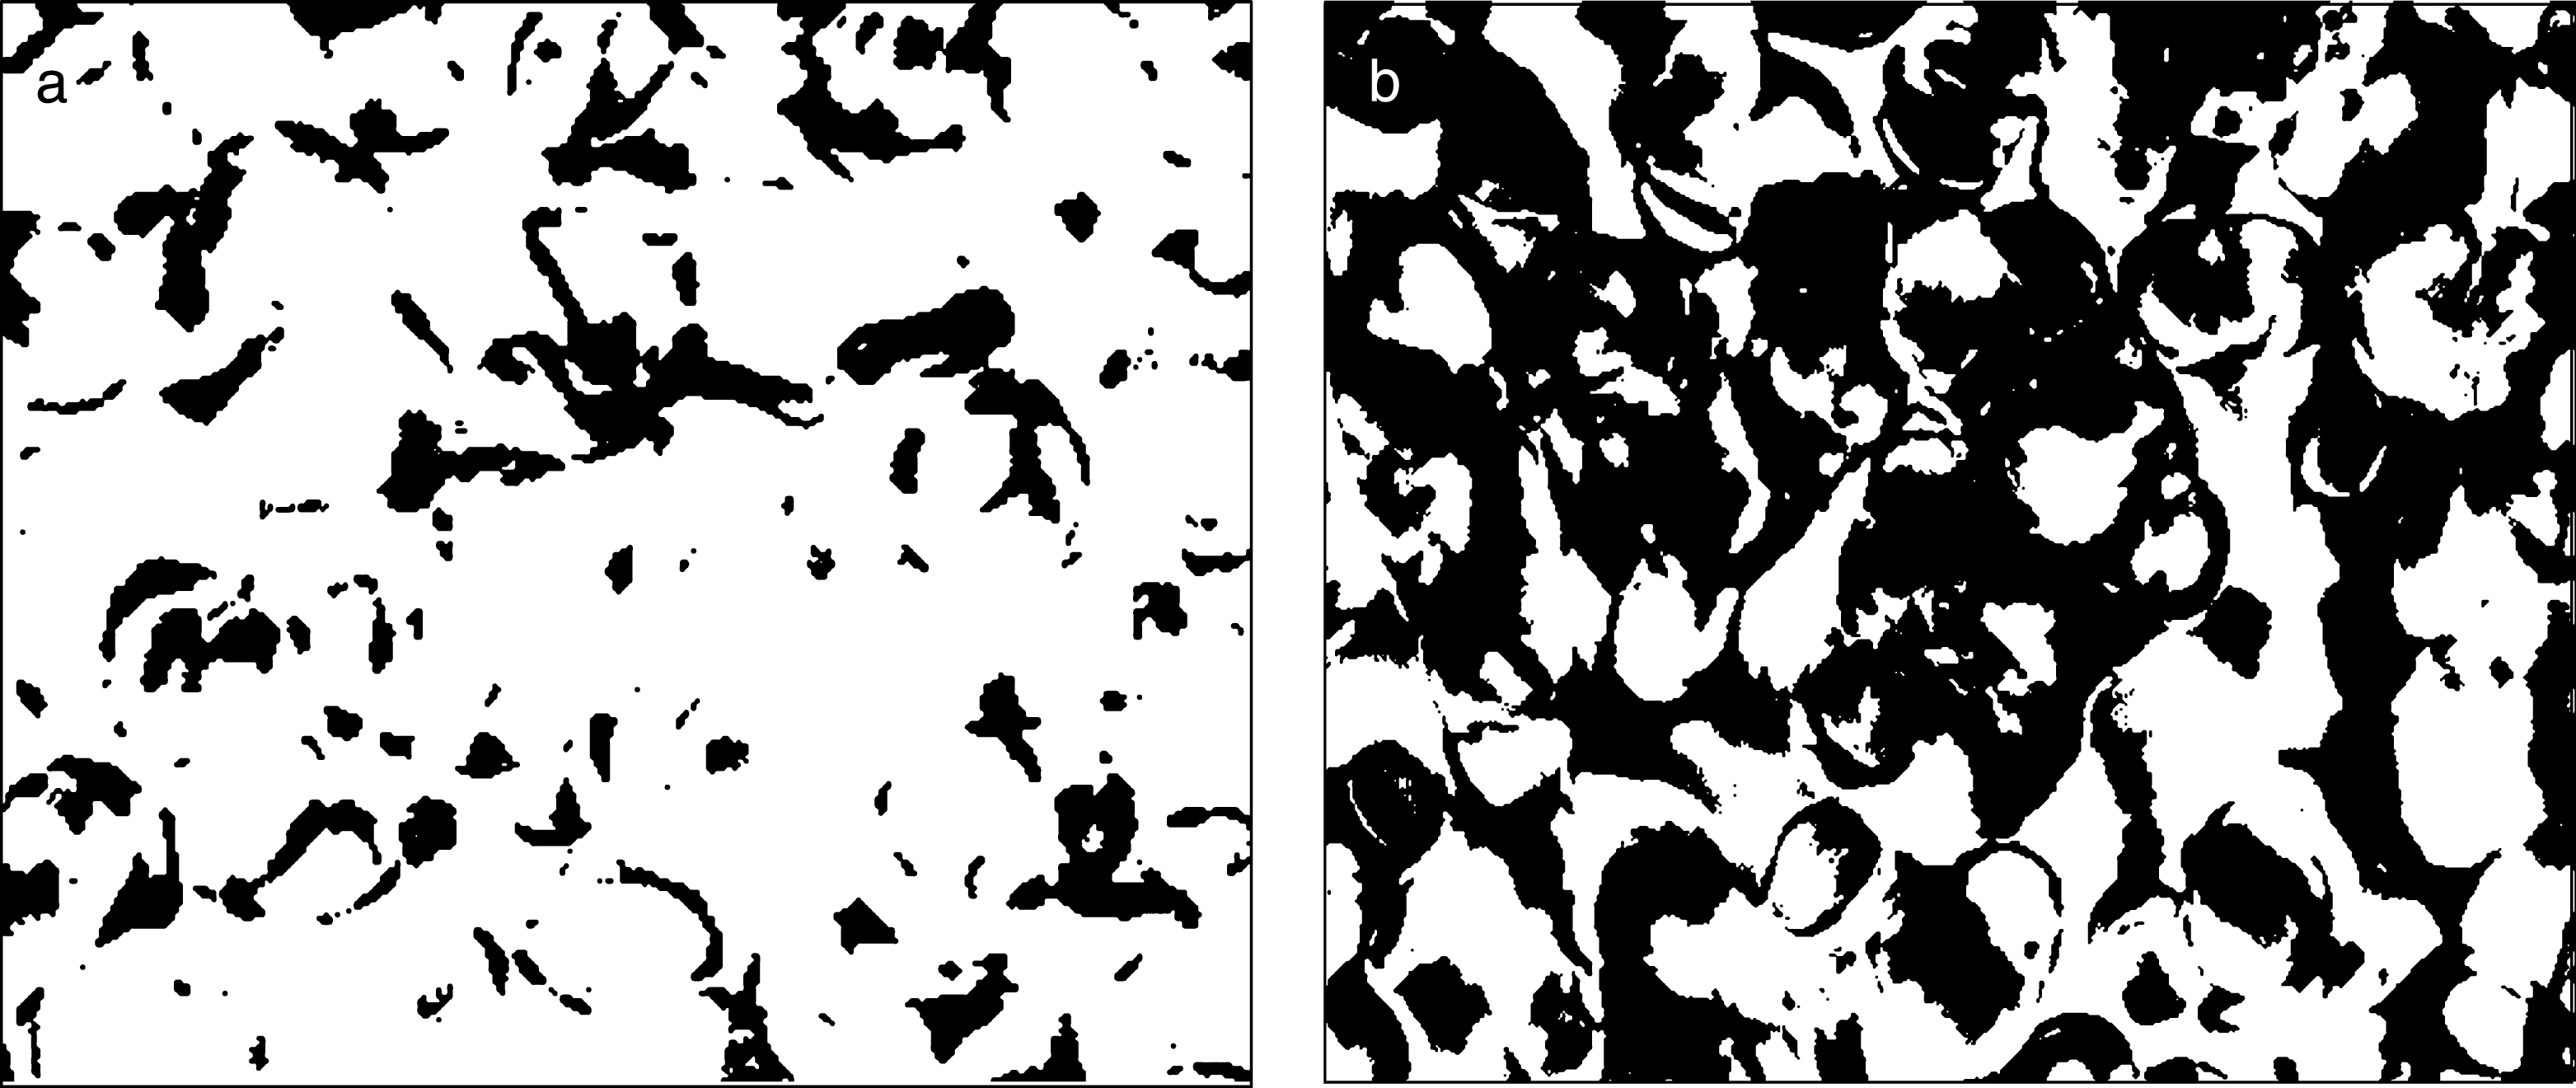 Non-aggregated RBCs, suspended in phosphate buffer saline, at a shear rate of 25 s−1 (a). Aggregated RBCs suspended in a Dextran 2000 solution, at 25 s−1 (b). The images have been converted to binary images (processed with the same parameters); the black structures are edges of cells and aggregates.